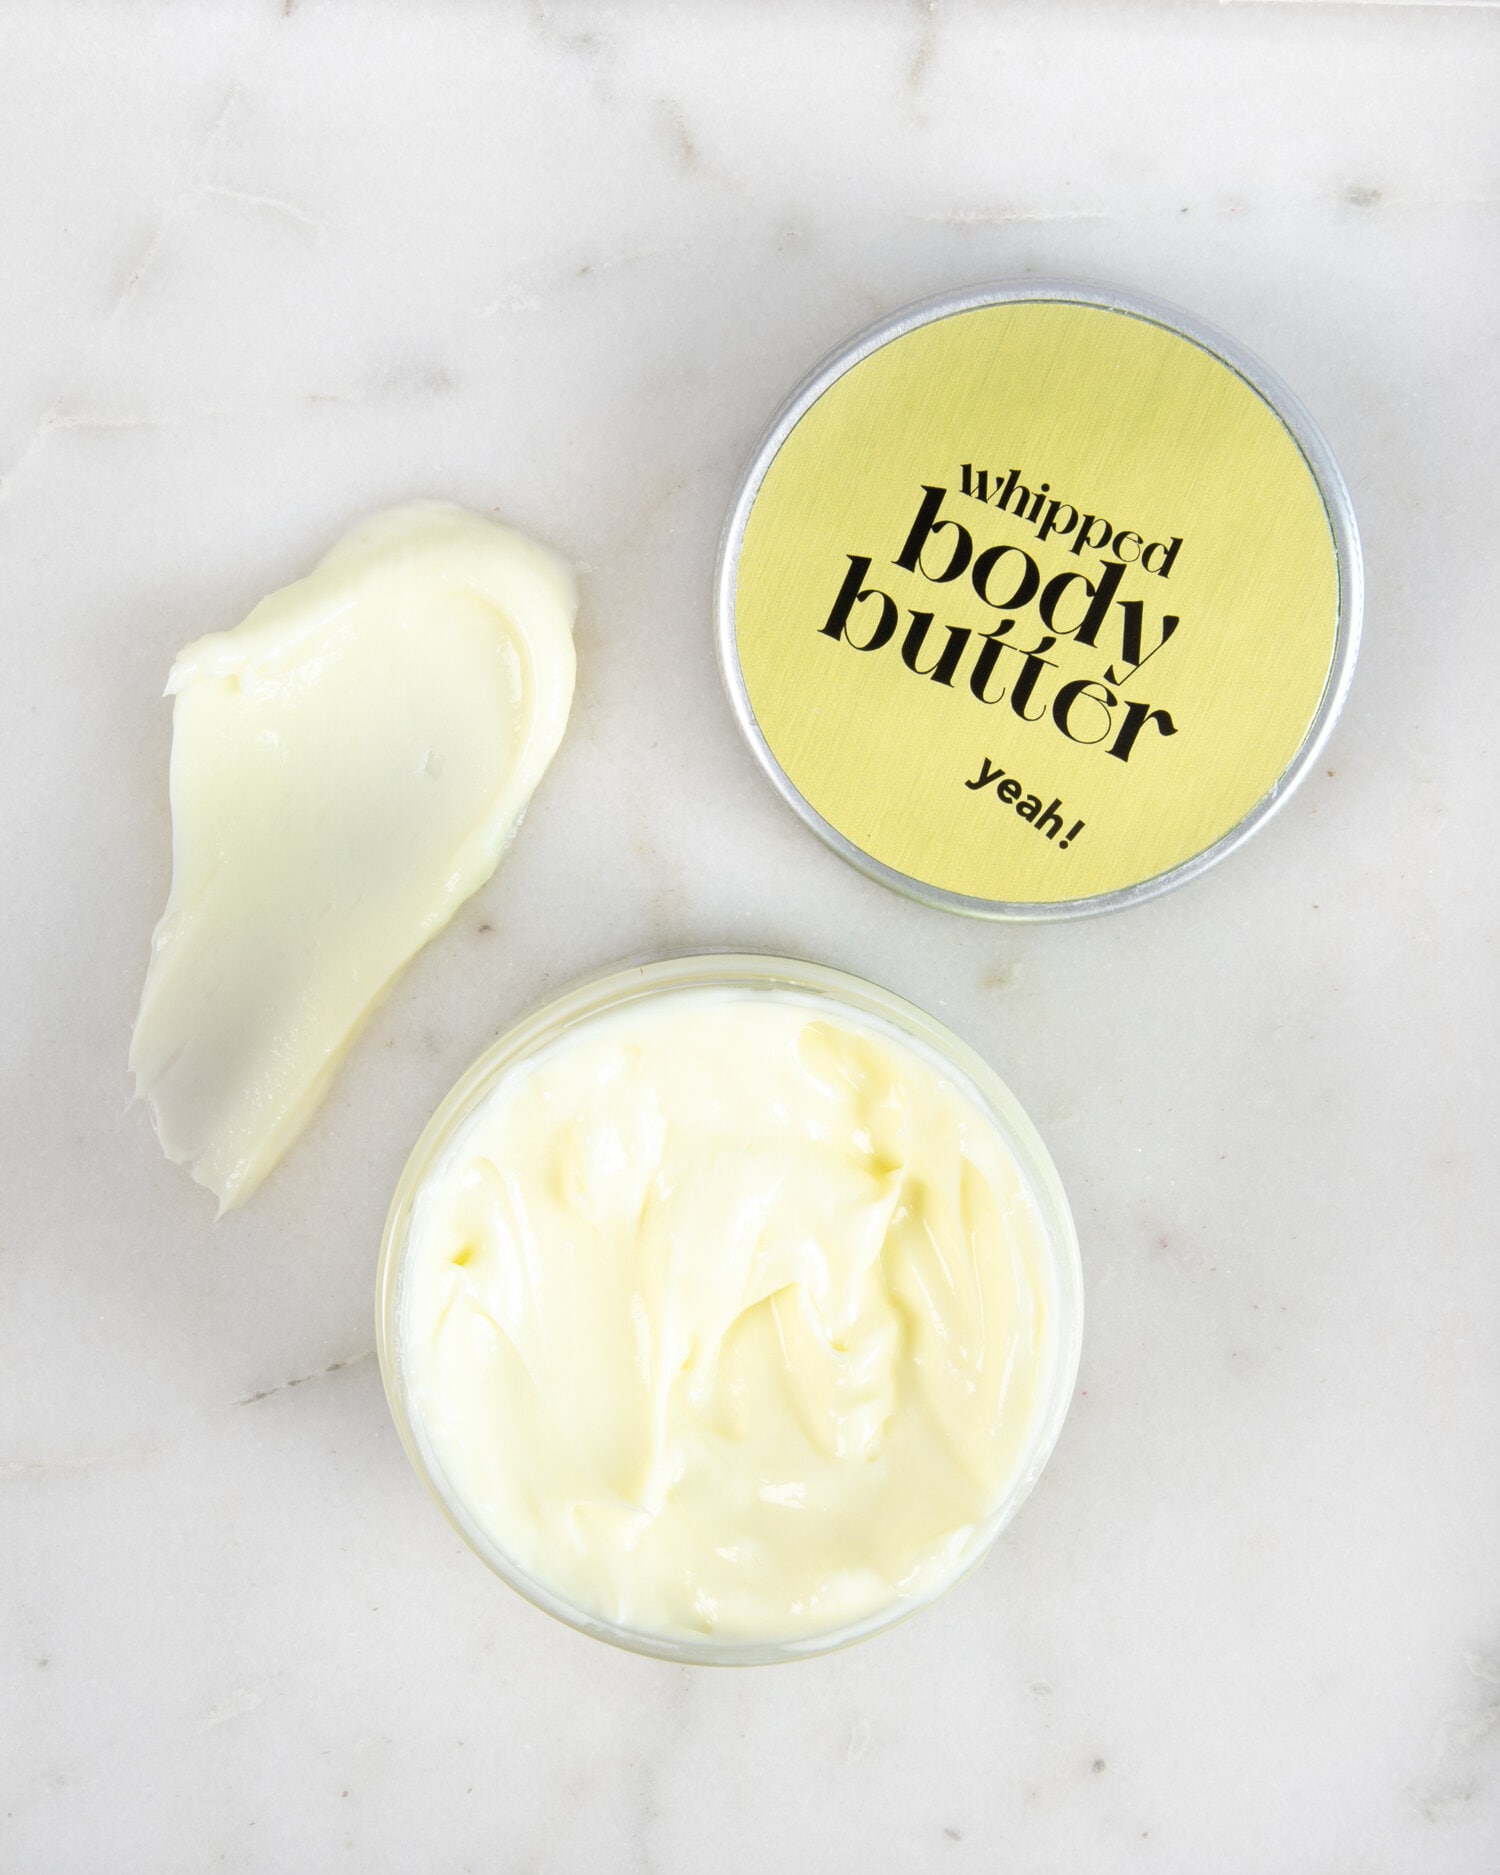 Whipped body butter YEAH